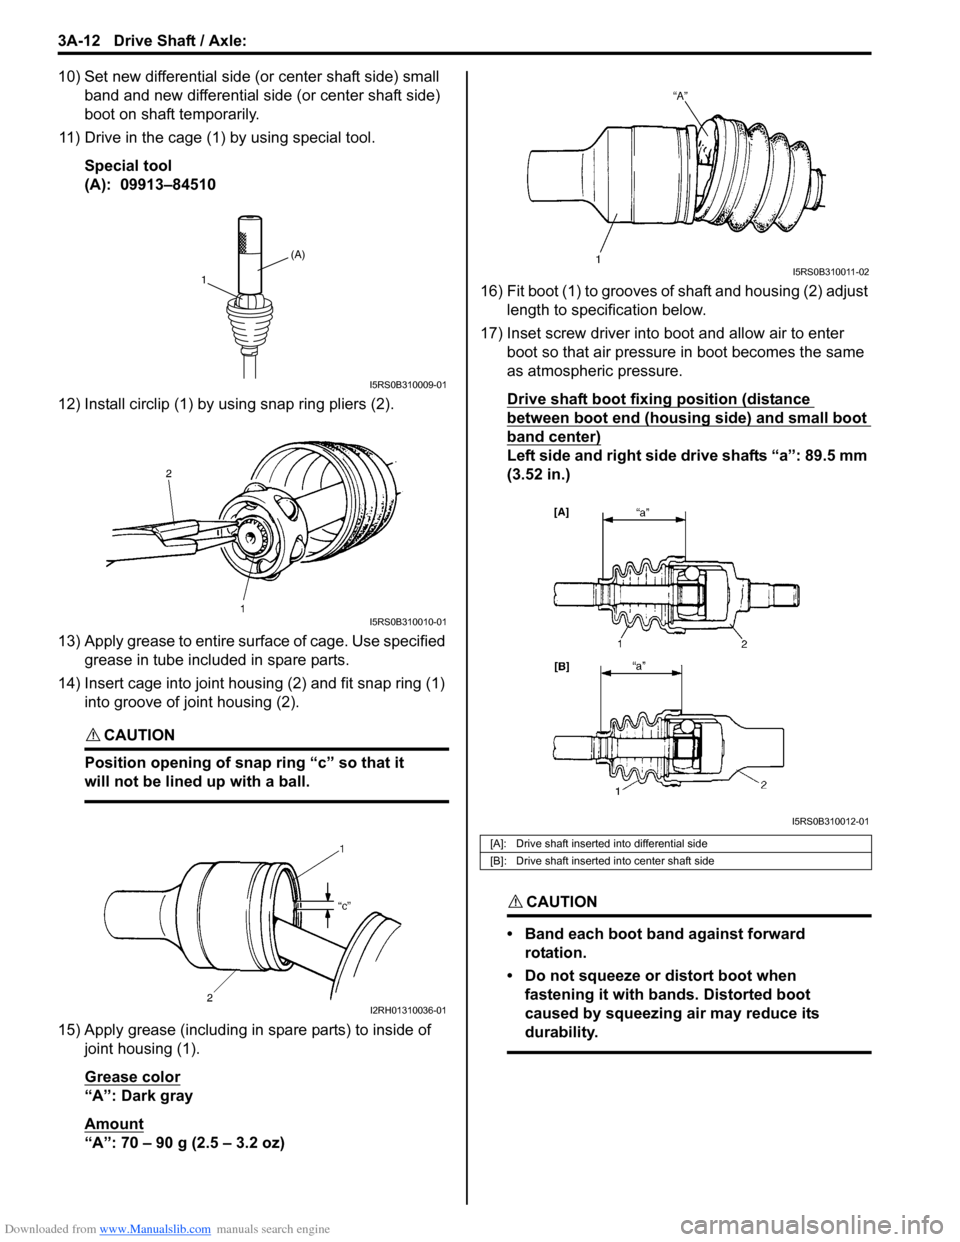 SUZUKI SWIFT 2005 2.G Service Workshop Manual Downloaded from www.Manualslib.com manuals search engine 3A-12 Drive Shaft / Axle: 
10) Set new differential side (or center shaft side) small band and new differential side (or center shaft side) 
bo